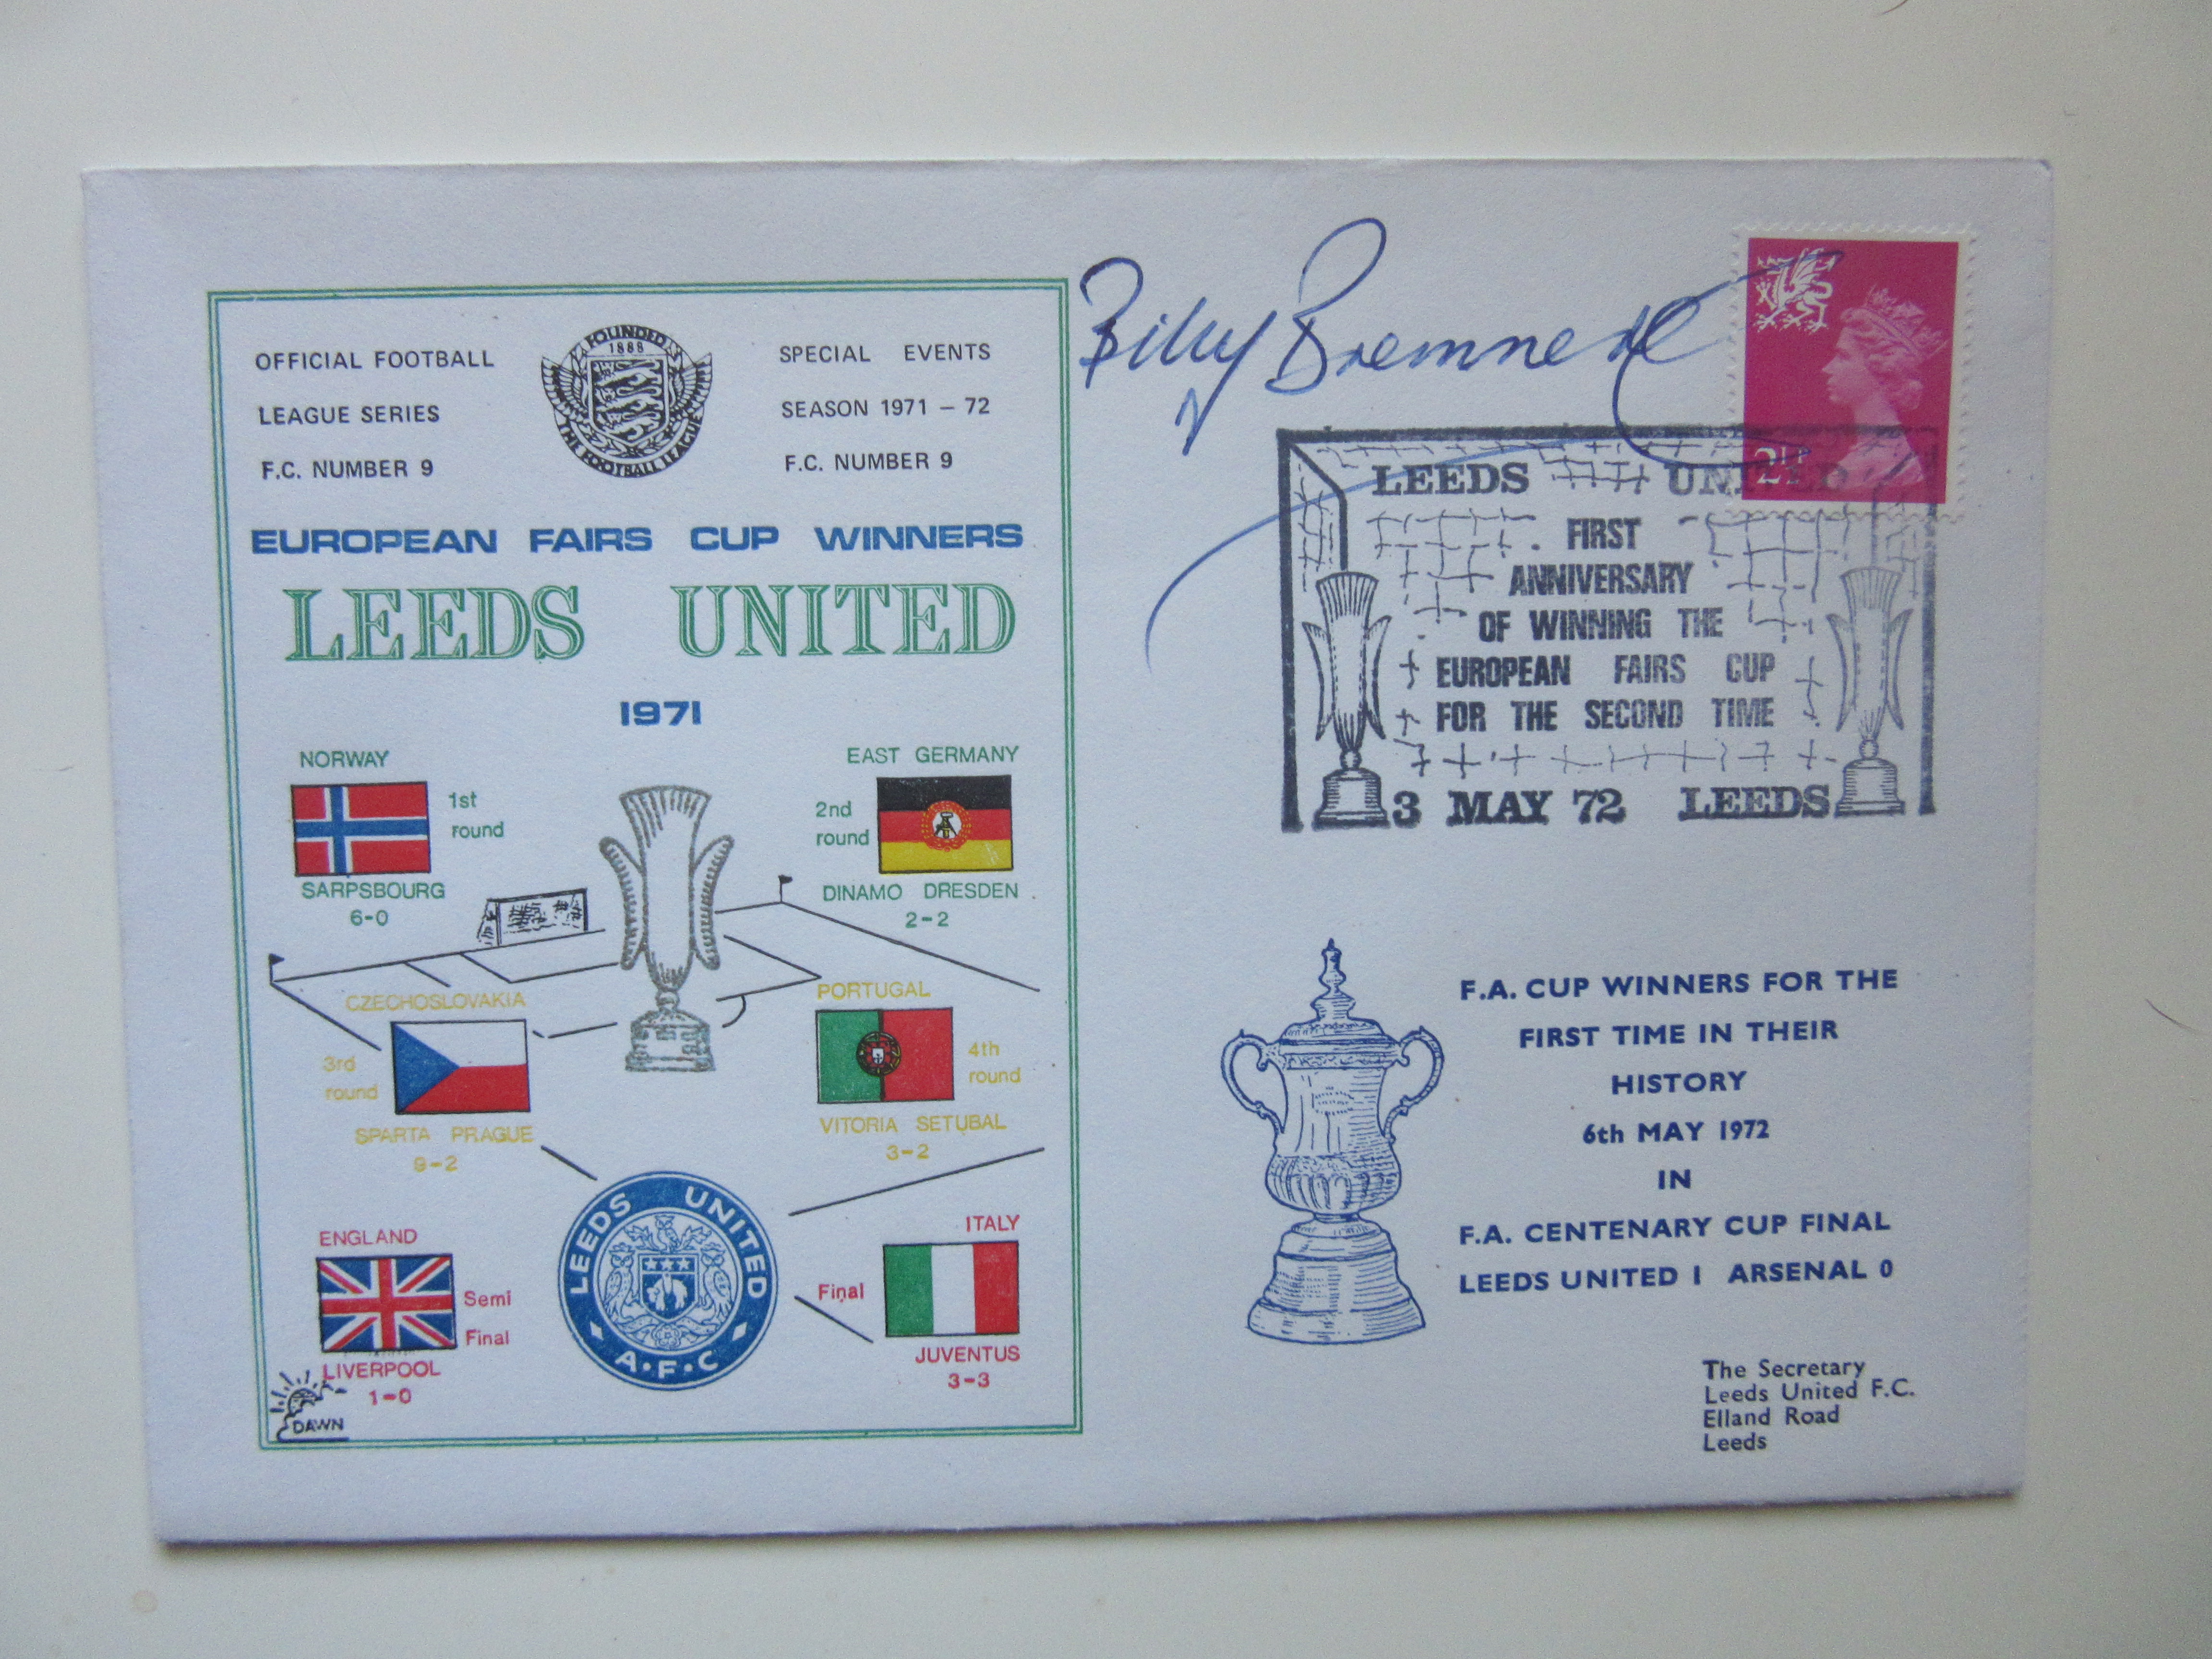 1972 LEEDS UNITED FA CUP / FAIRS CUP POSTAL COVER AUTOGRAPHED BY BILLY BREMNER